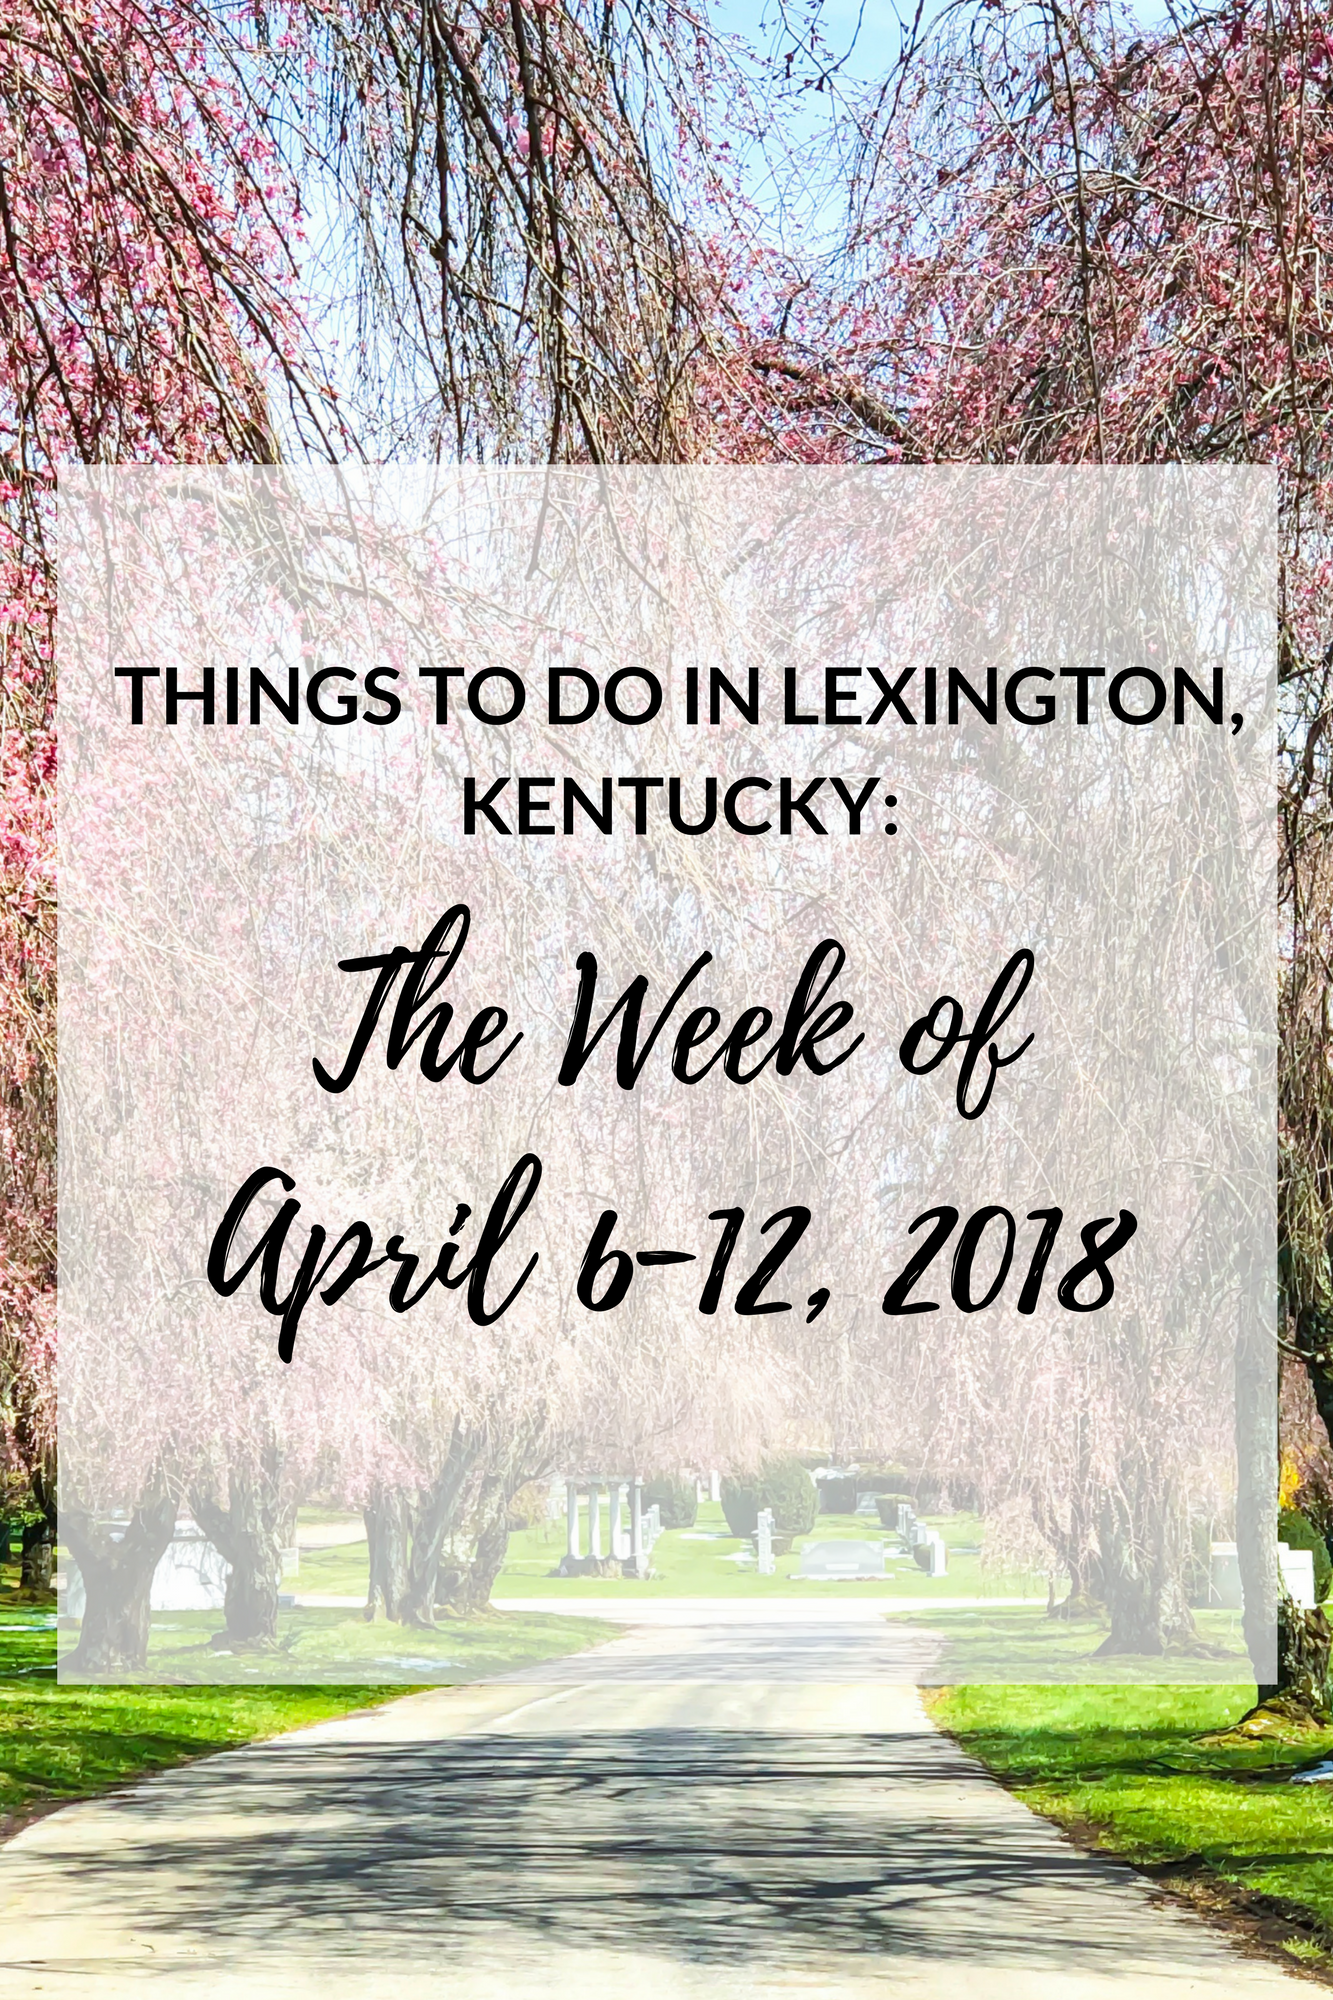 It's finally the weekend again!! Is it just me or has this been a super long week?!  I've been together another list of events and things to do to keep you entertained this weekend and in the upcoming week! #sharethelex #visitlex #travelky #lexingtonky #kentucky